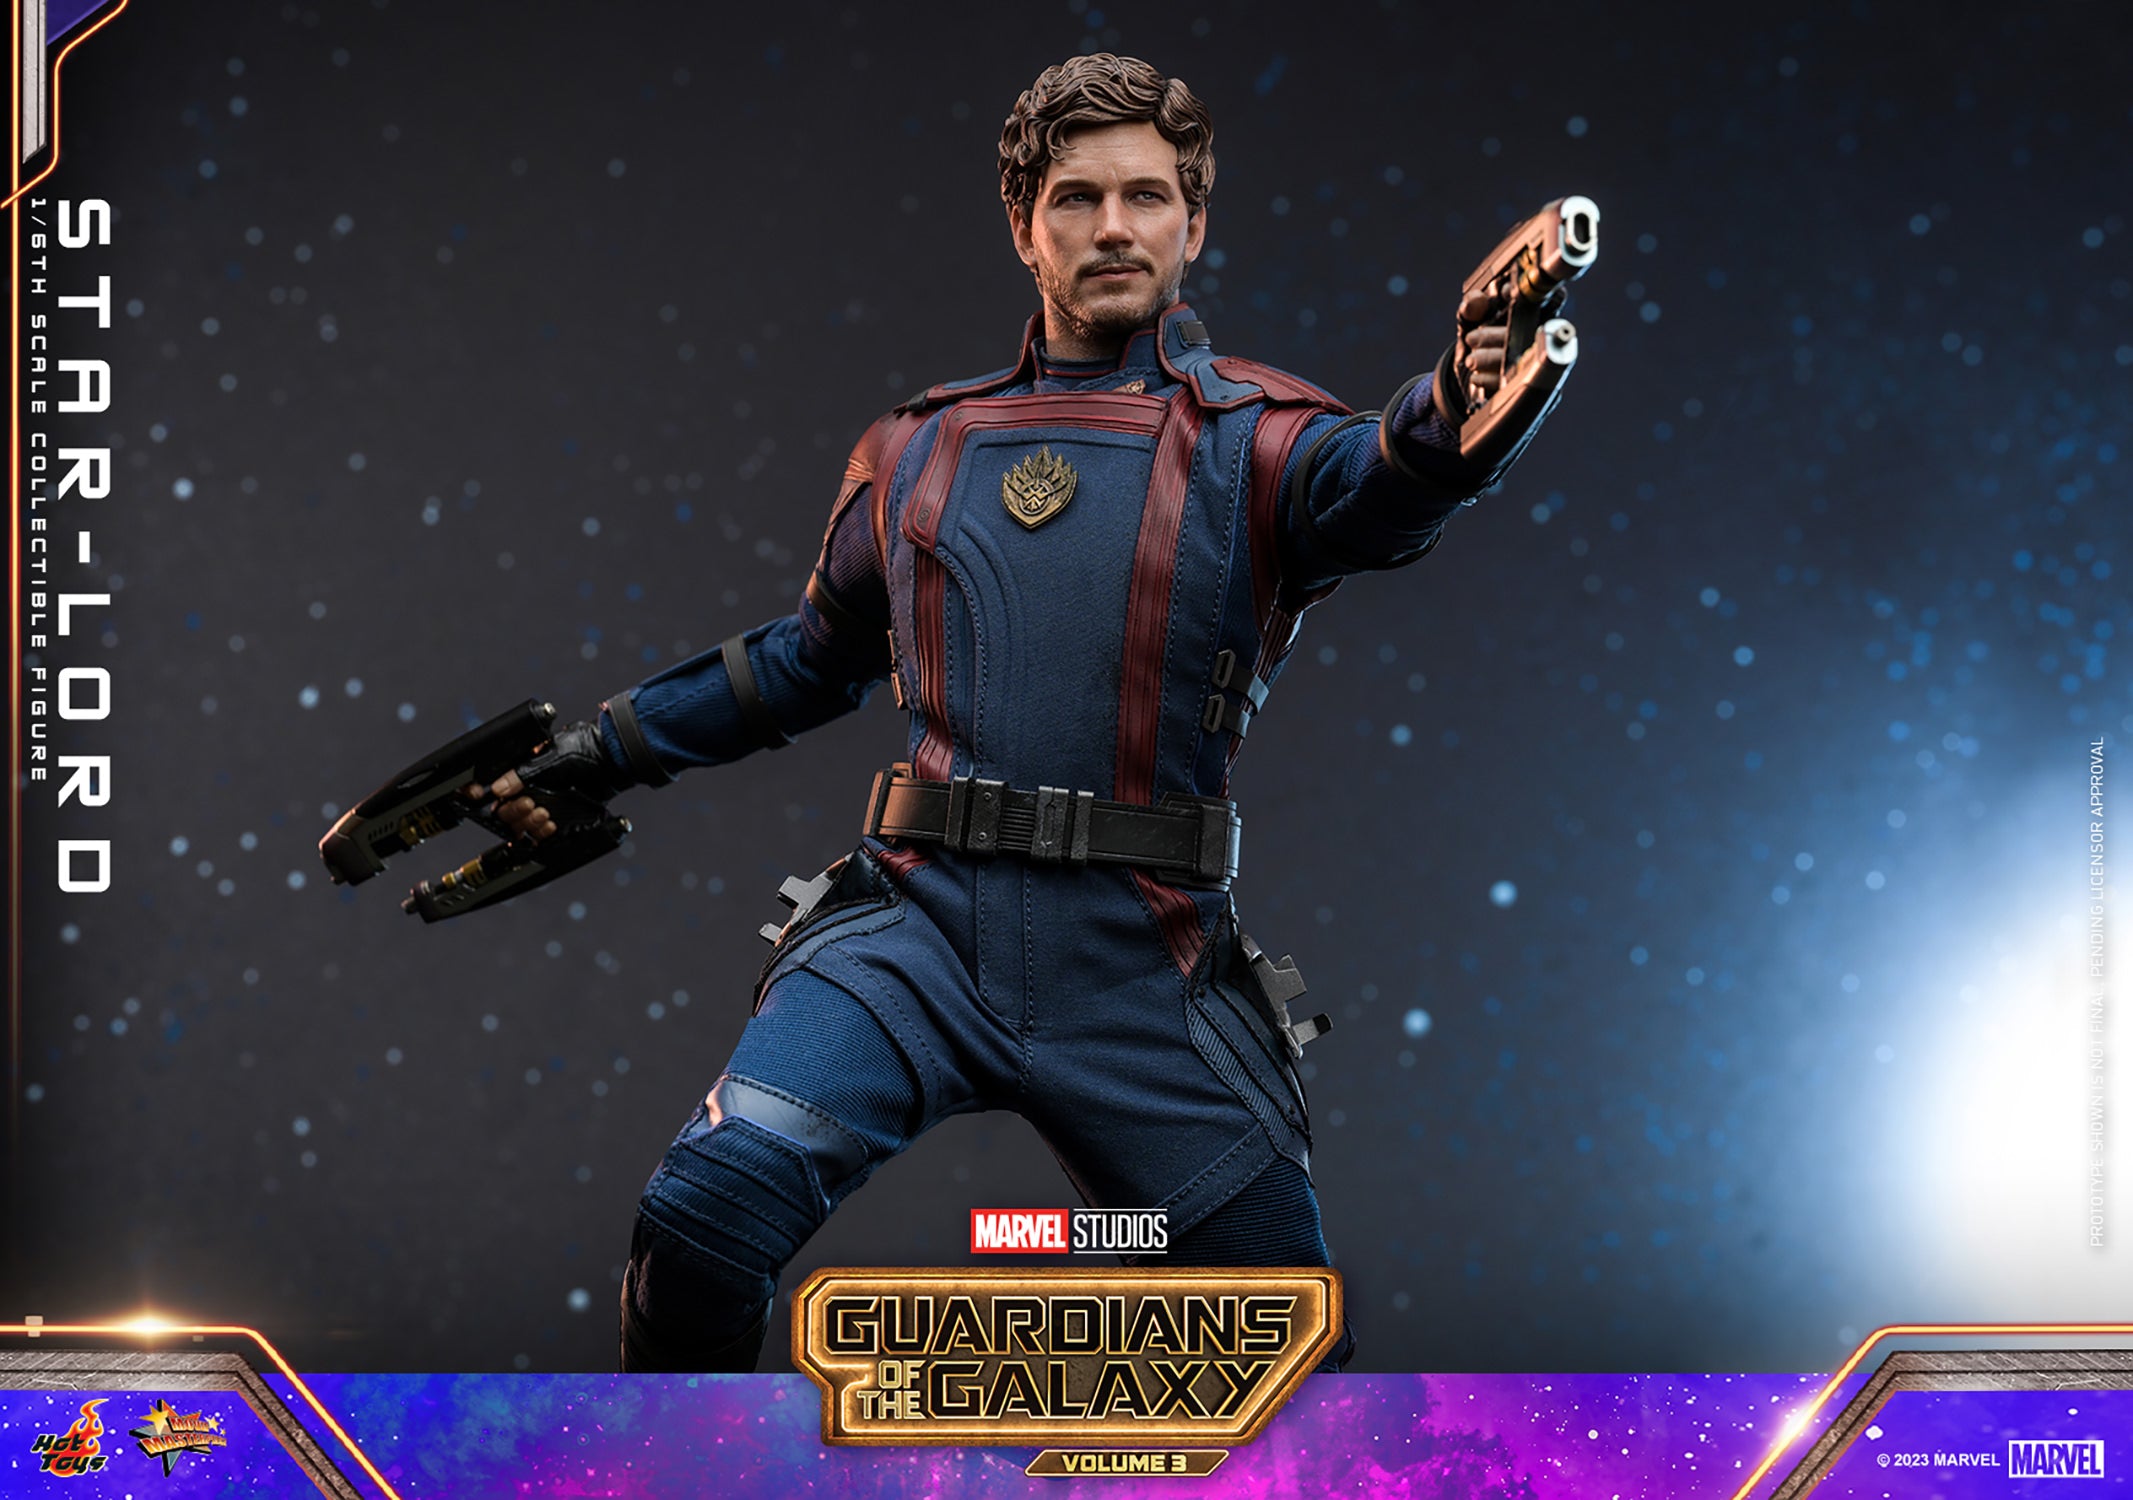 Marvel Art Scale Statue 1/10 Guardians of the Galaxy Vol. 3 Star